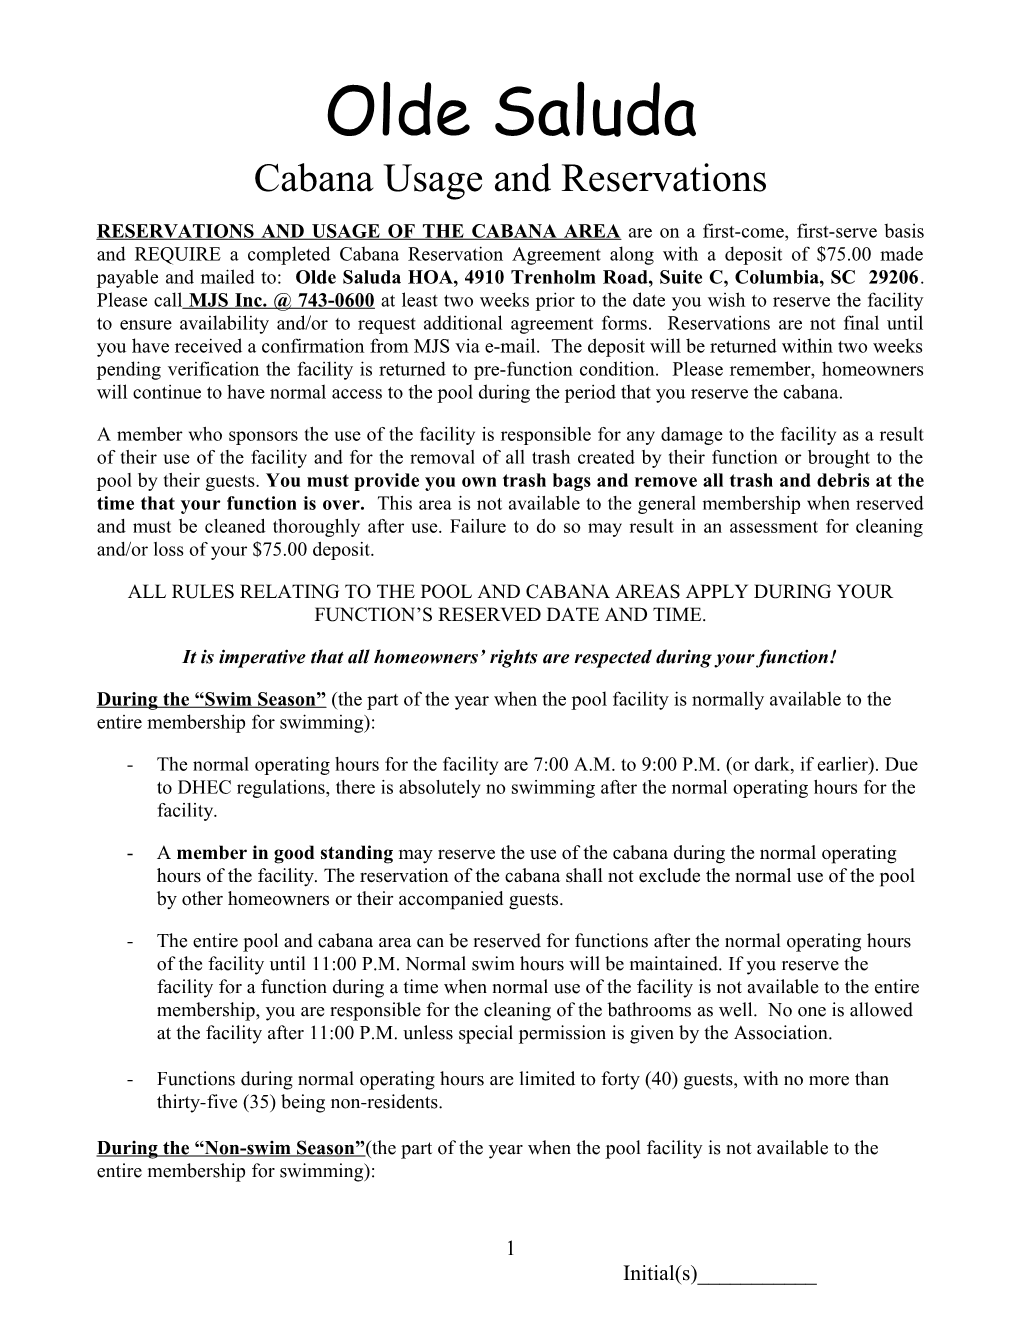 Cabana Usage and Reservations